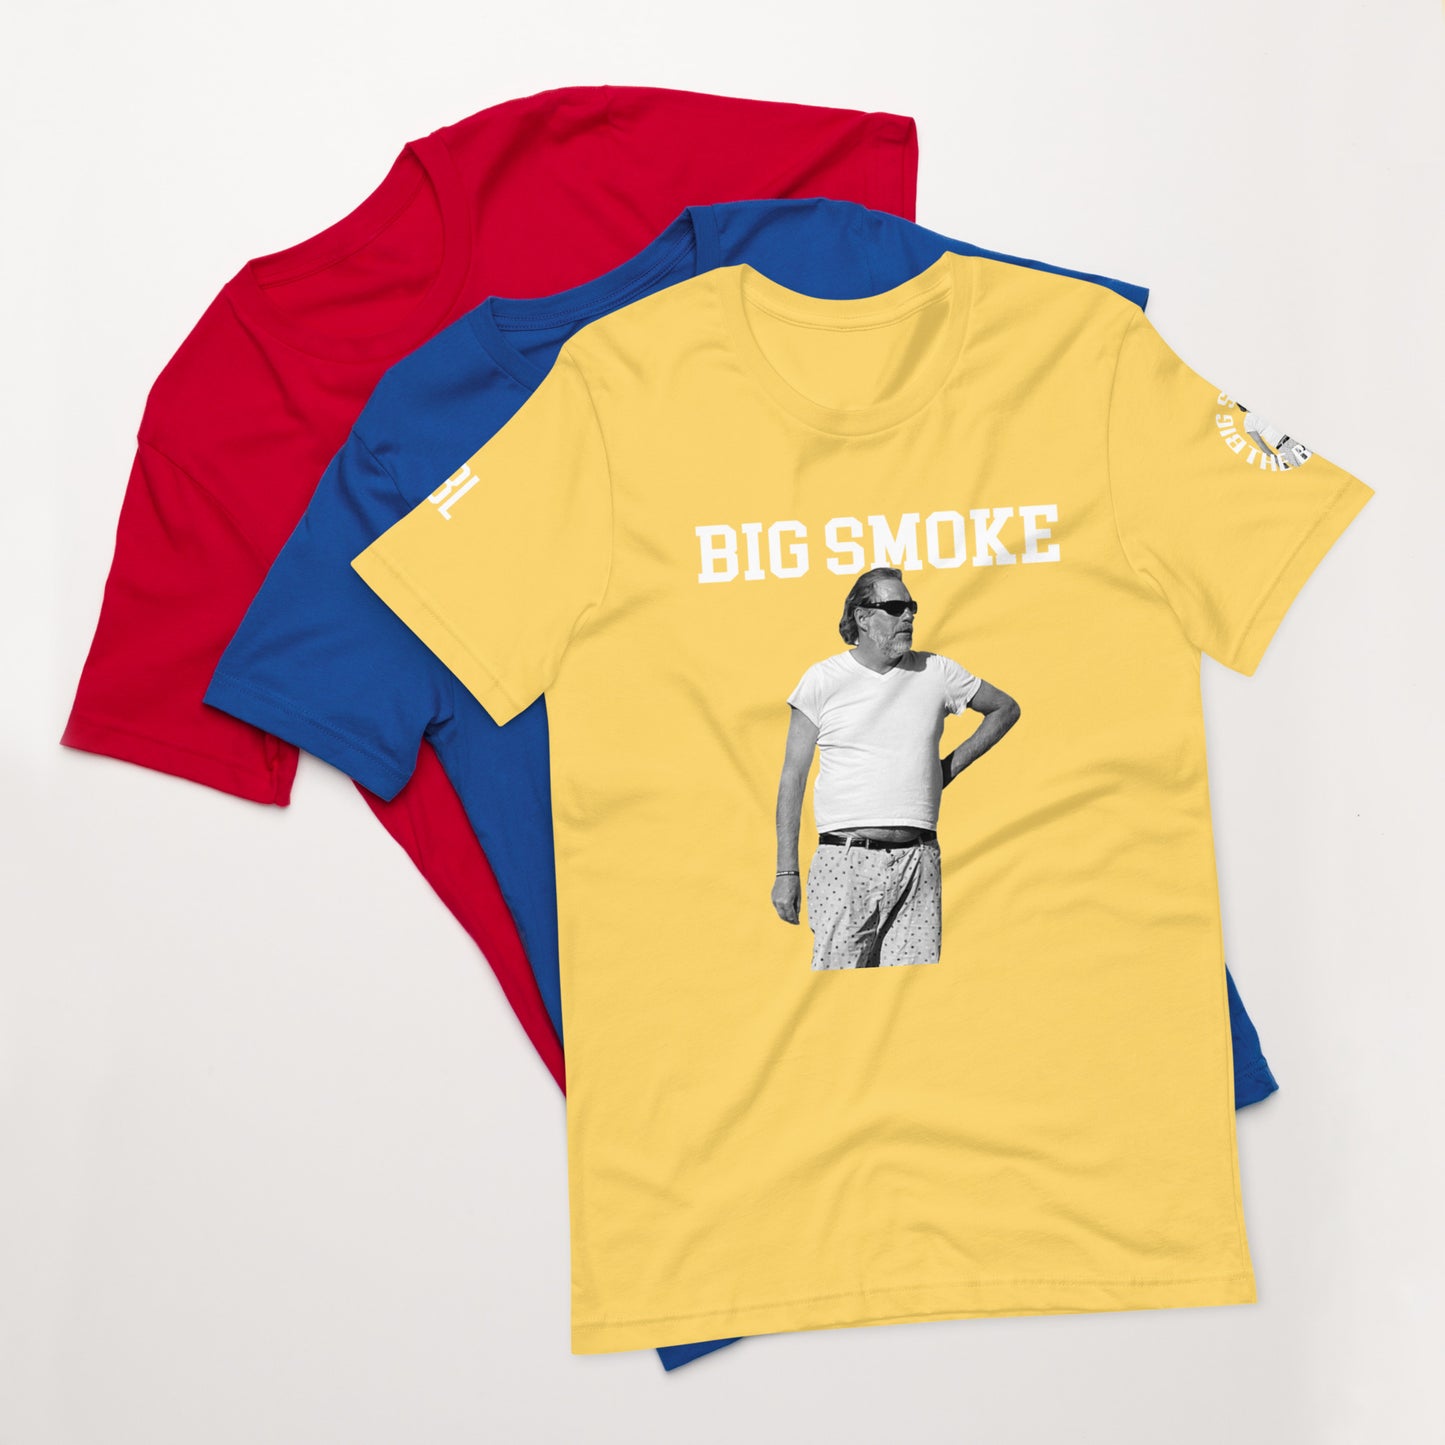 BigSmoke - The T-Shirt (#GBL LIMITED  EDITION)